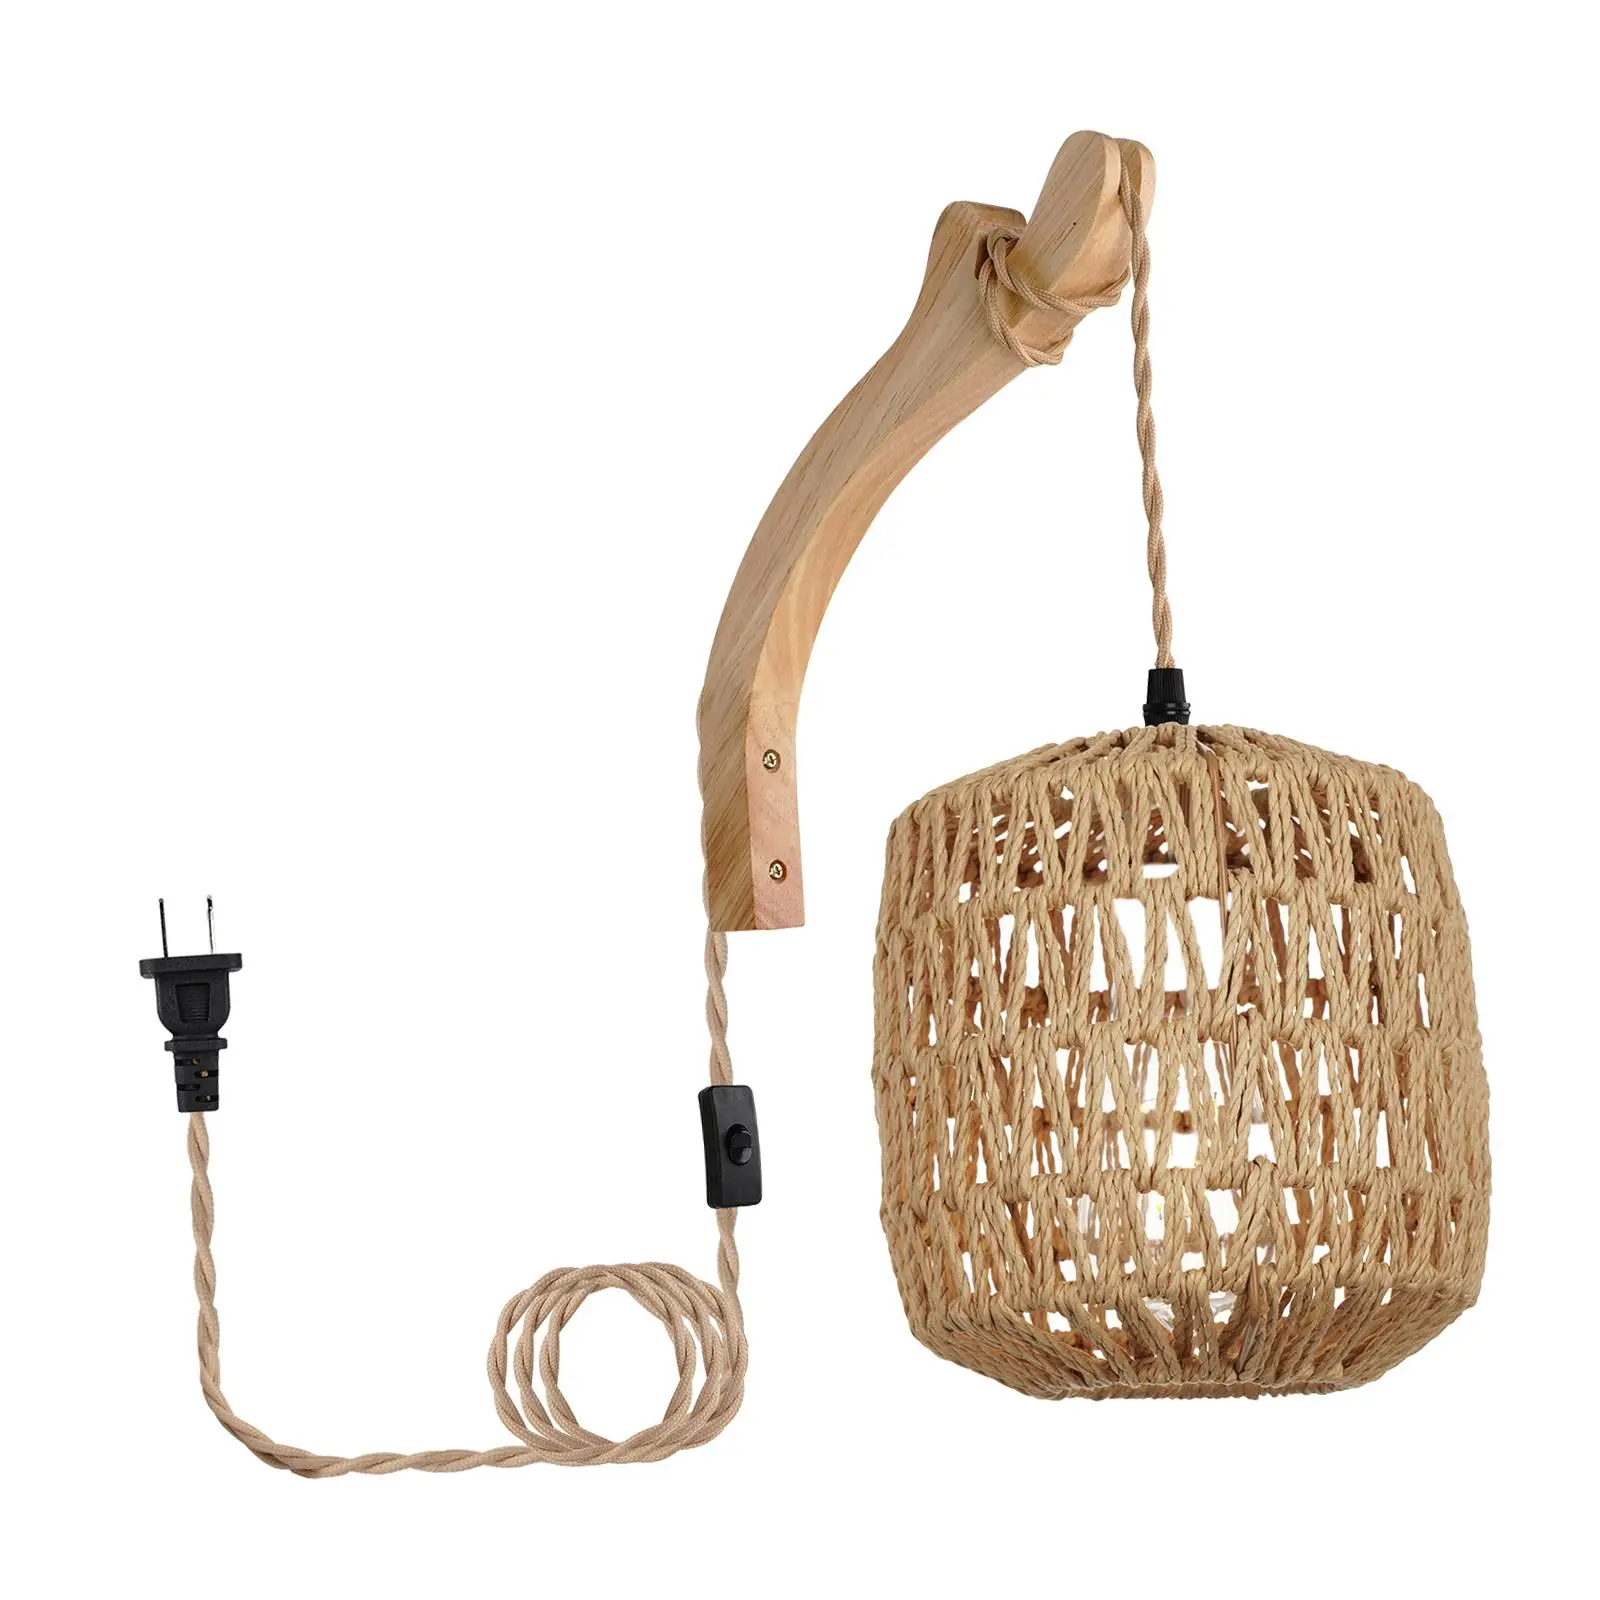 Wall Sconce Adjustable Cord Handwoven Lampshade Rustic Wall Lamp with Wood Arm for Dining Room Bedroom Bedside Kitchen Decor